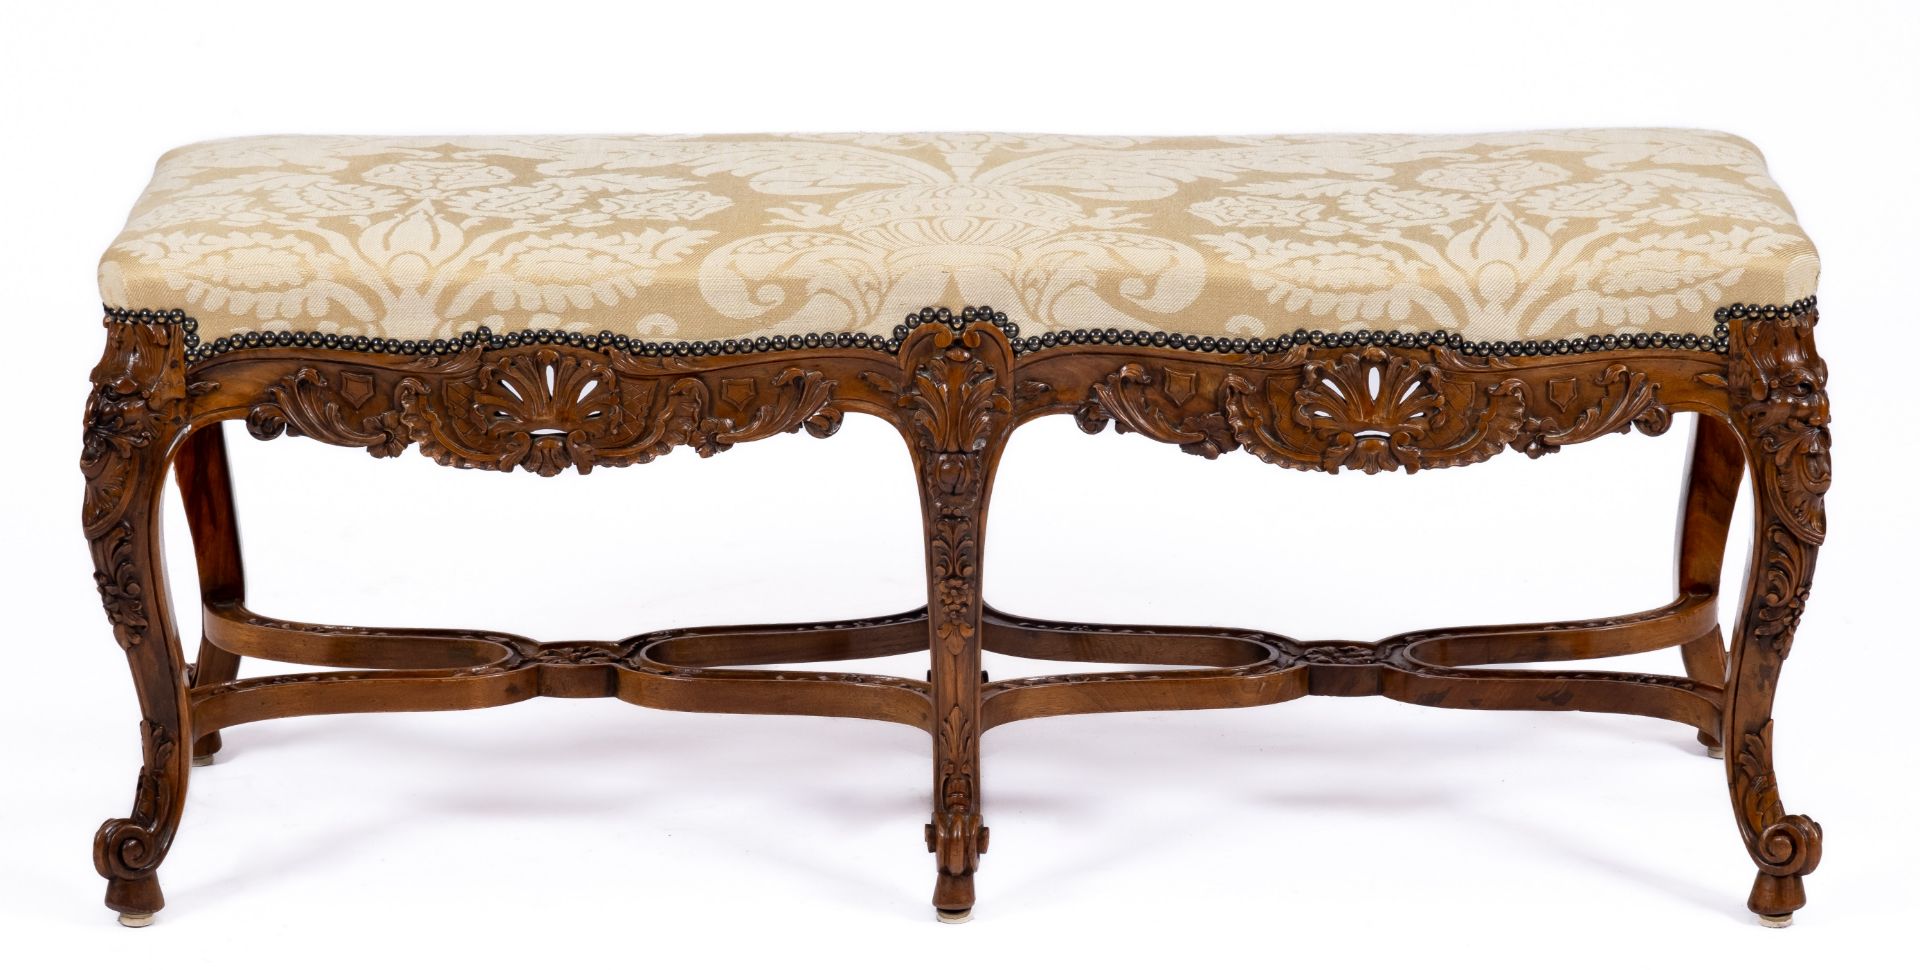 A French carved walnut banquette - Image 2 of 4